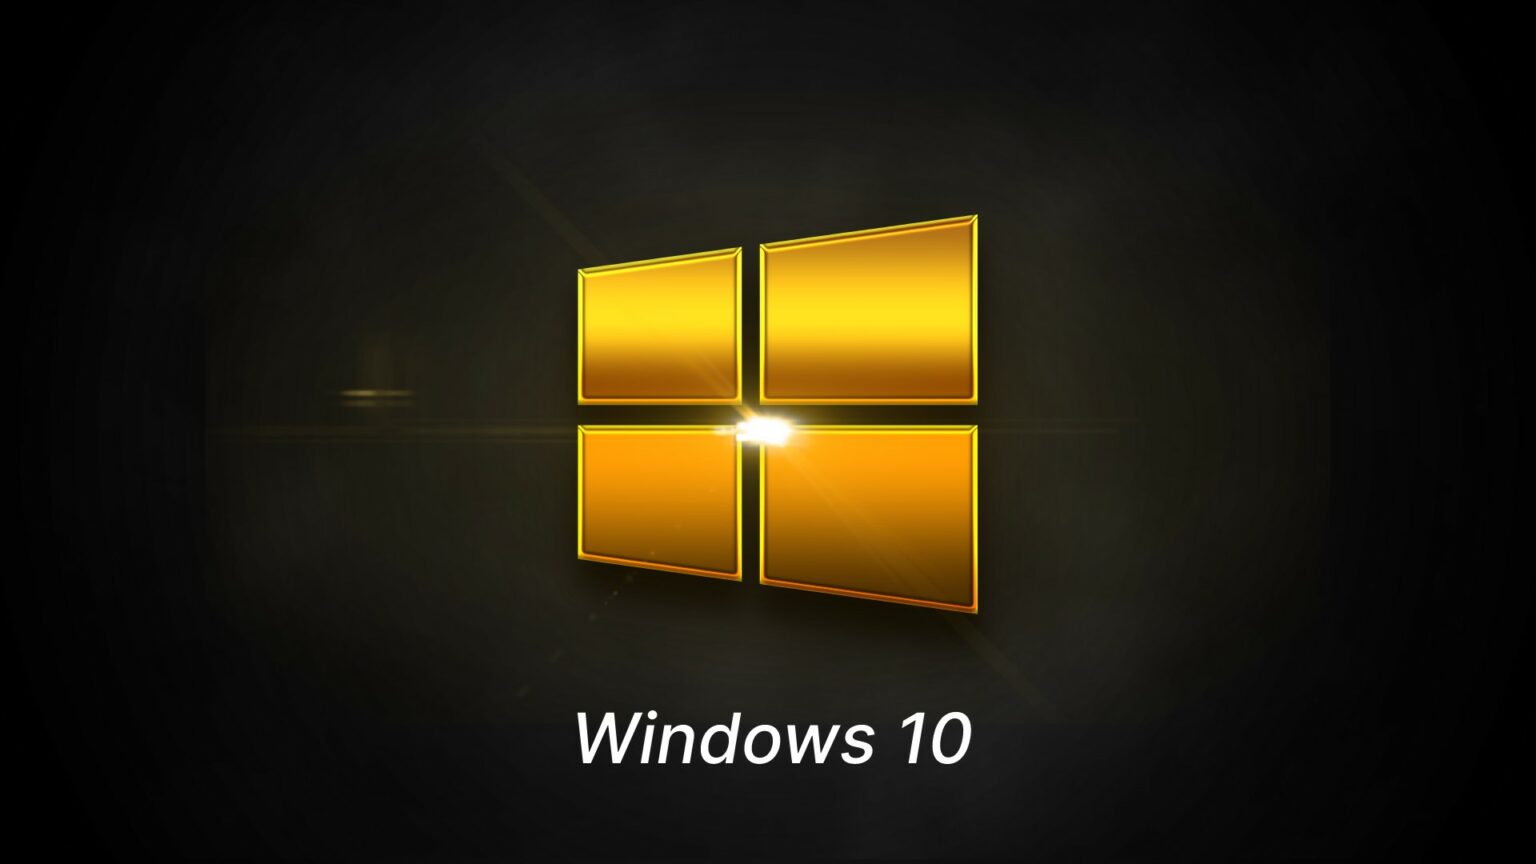 Windows 10 logo Save big-time on Microsoft software by using promo code CULT at CdkeySales.com.